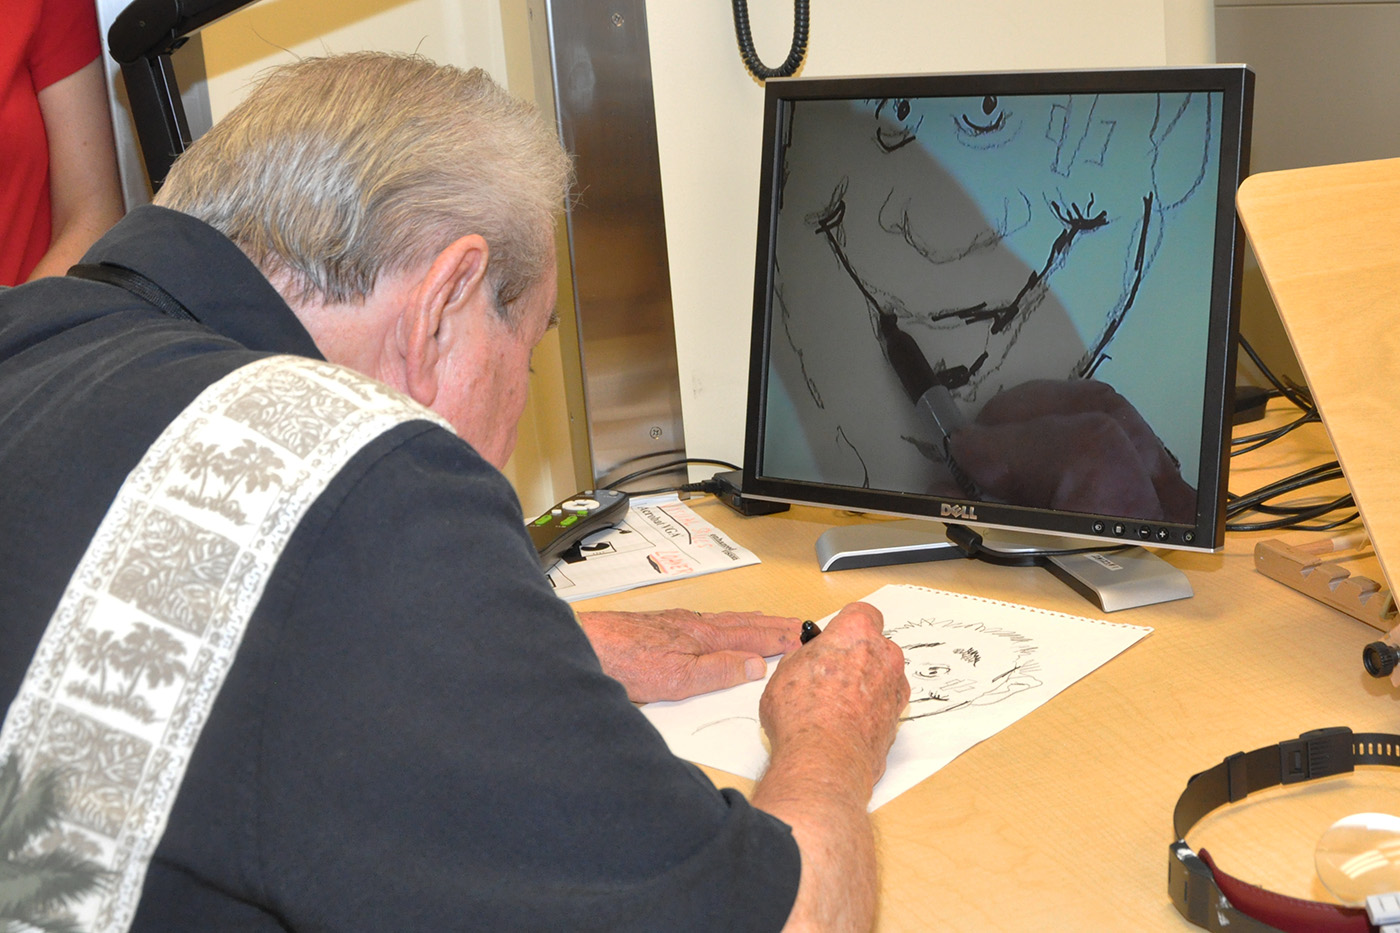 A man paints in front of a computer monitor.